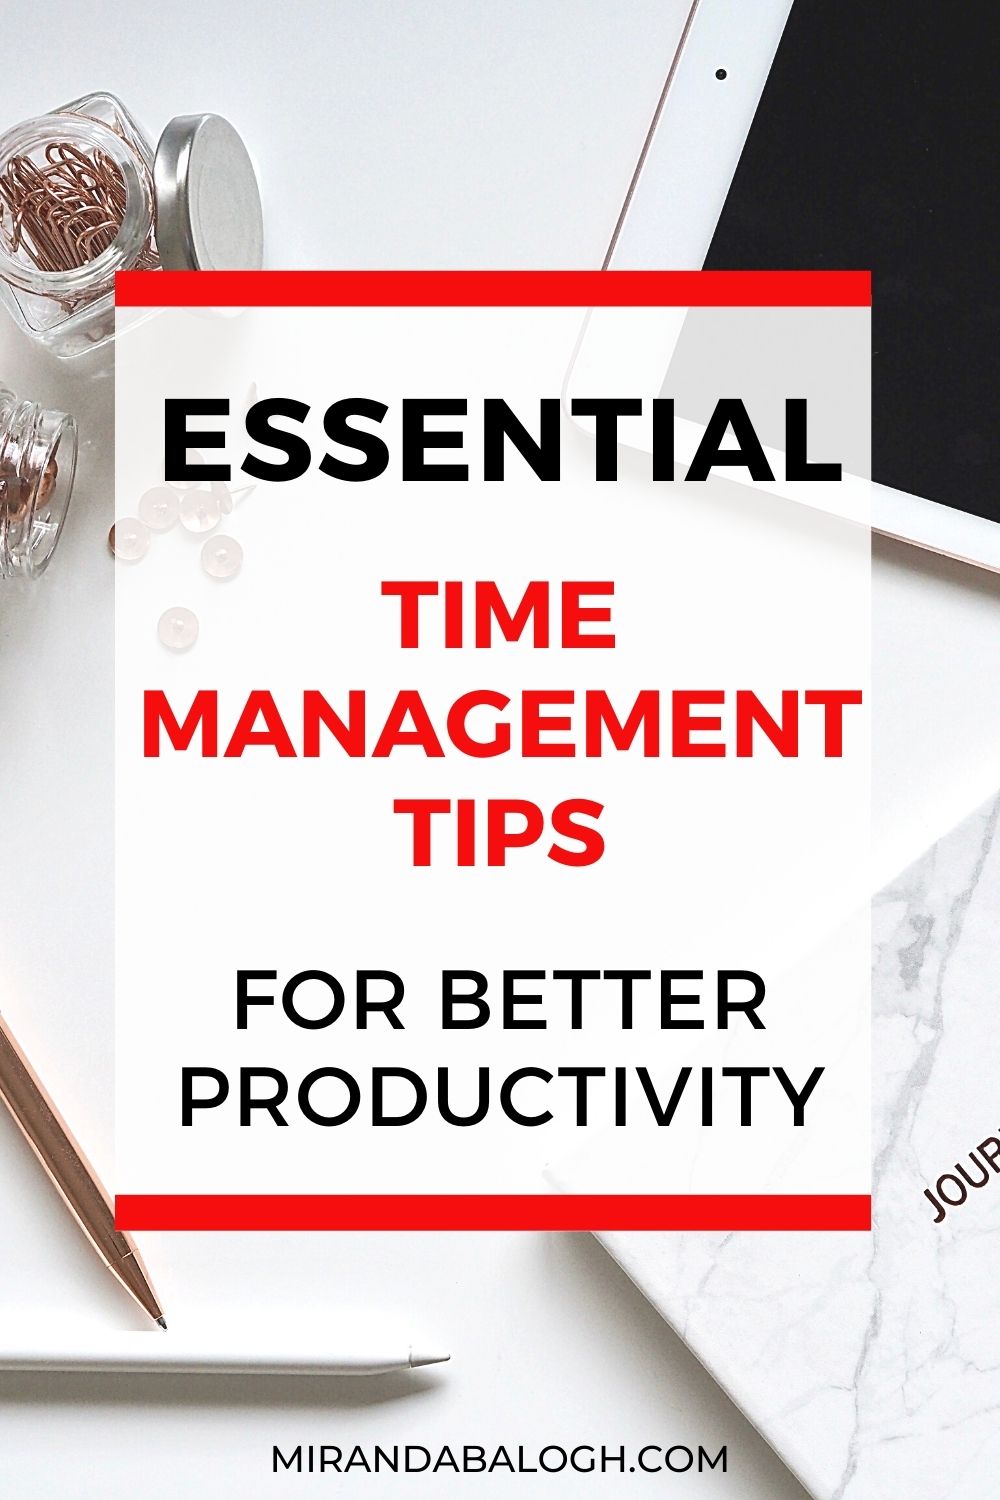 Successful workers implement effective time management techniques for better productivity at work. In this blog, you’ll learn about 5 essential time management tips for students, workers, busy moms., and entrepreneurs. These skills will teach you about organizing and planning, and you’ll learn about tools to help complete your tasks on time. #timemanagement #timemanagementtips #productivity